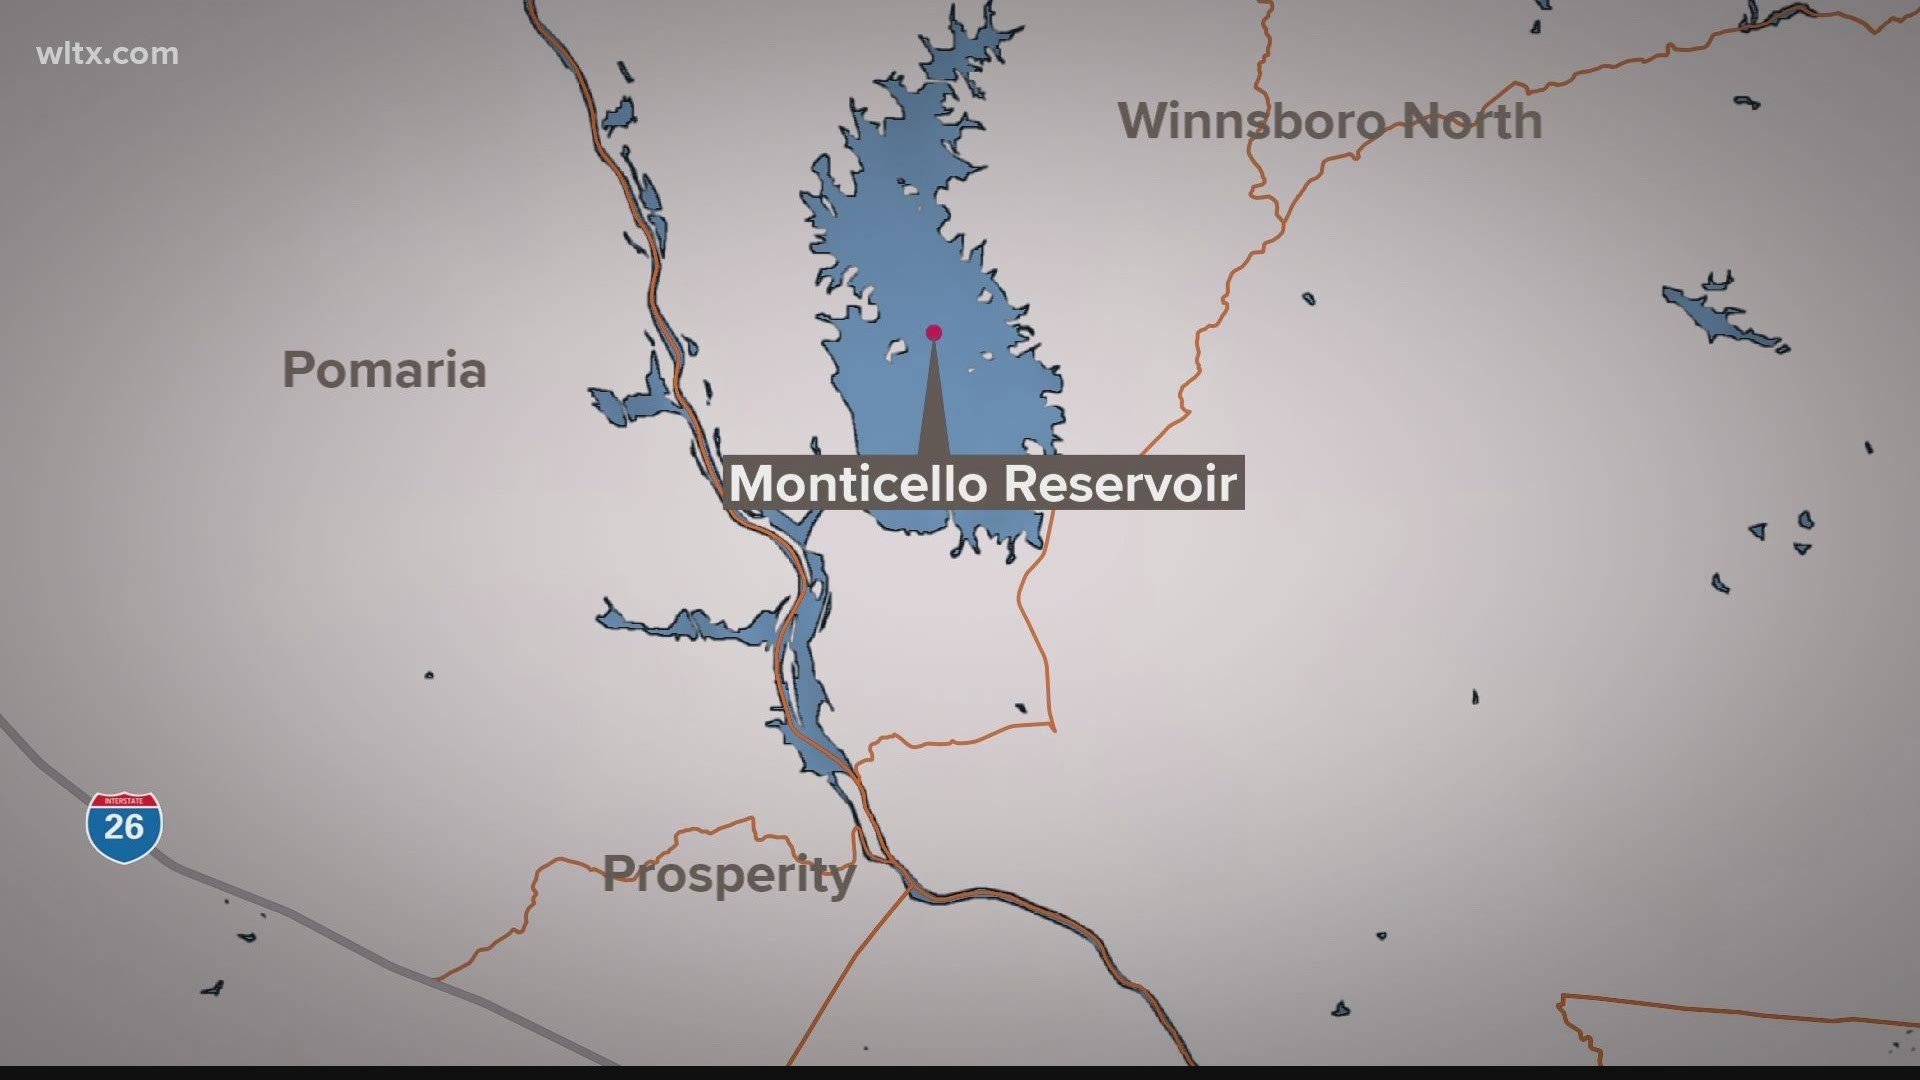 A six-year-old and a 19-year-old both drowned in separate incidents at Lake Monticello within a week.